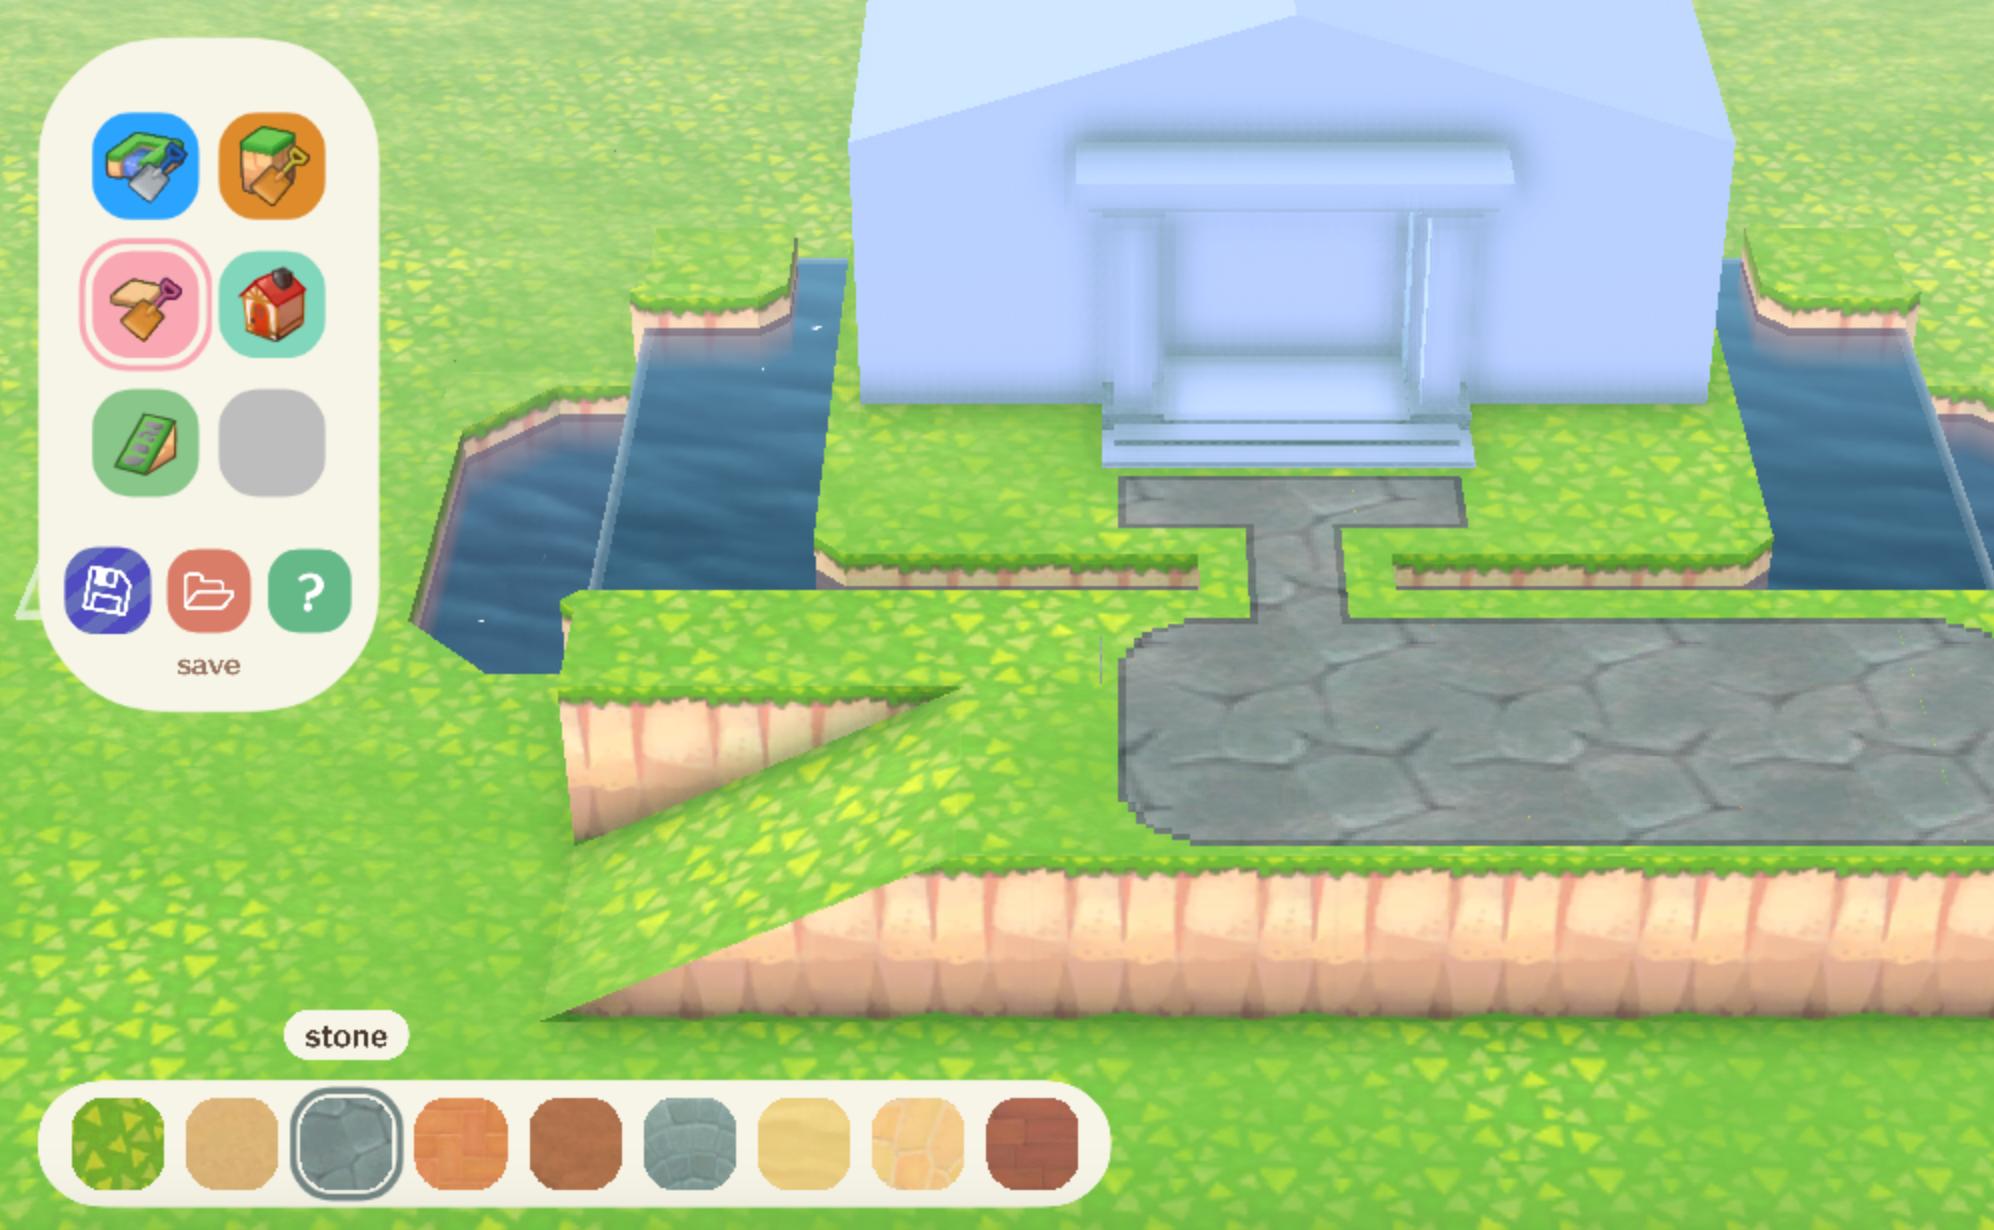 An image of the Animal Crossing Island planner app being used to choose house materials for an Island layout.